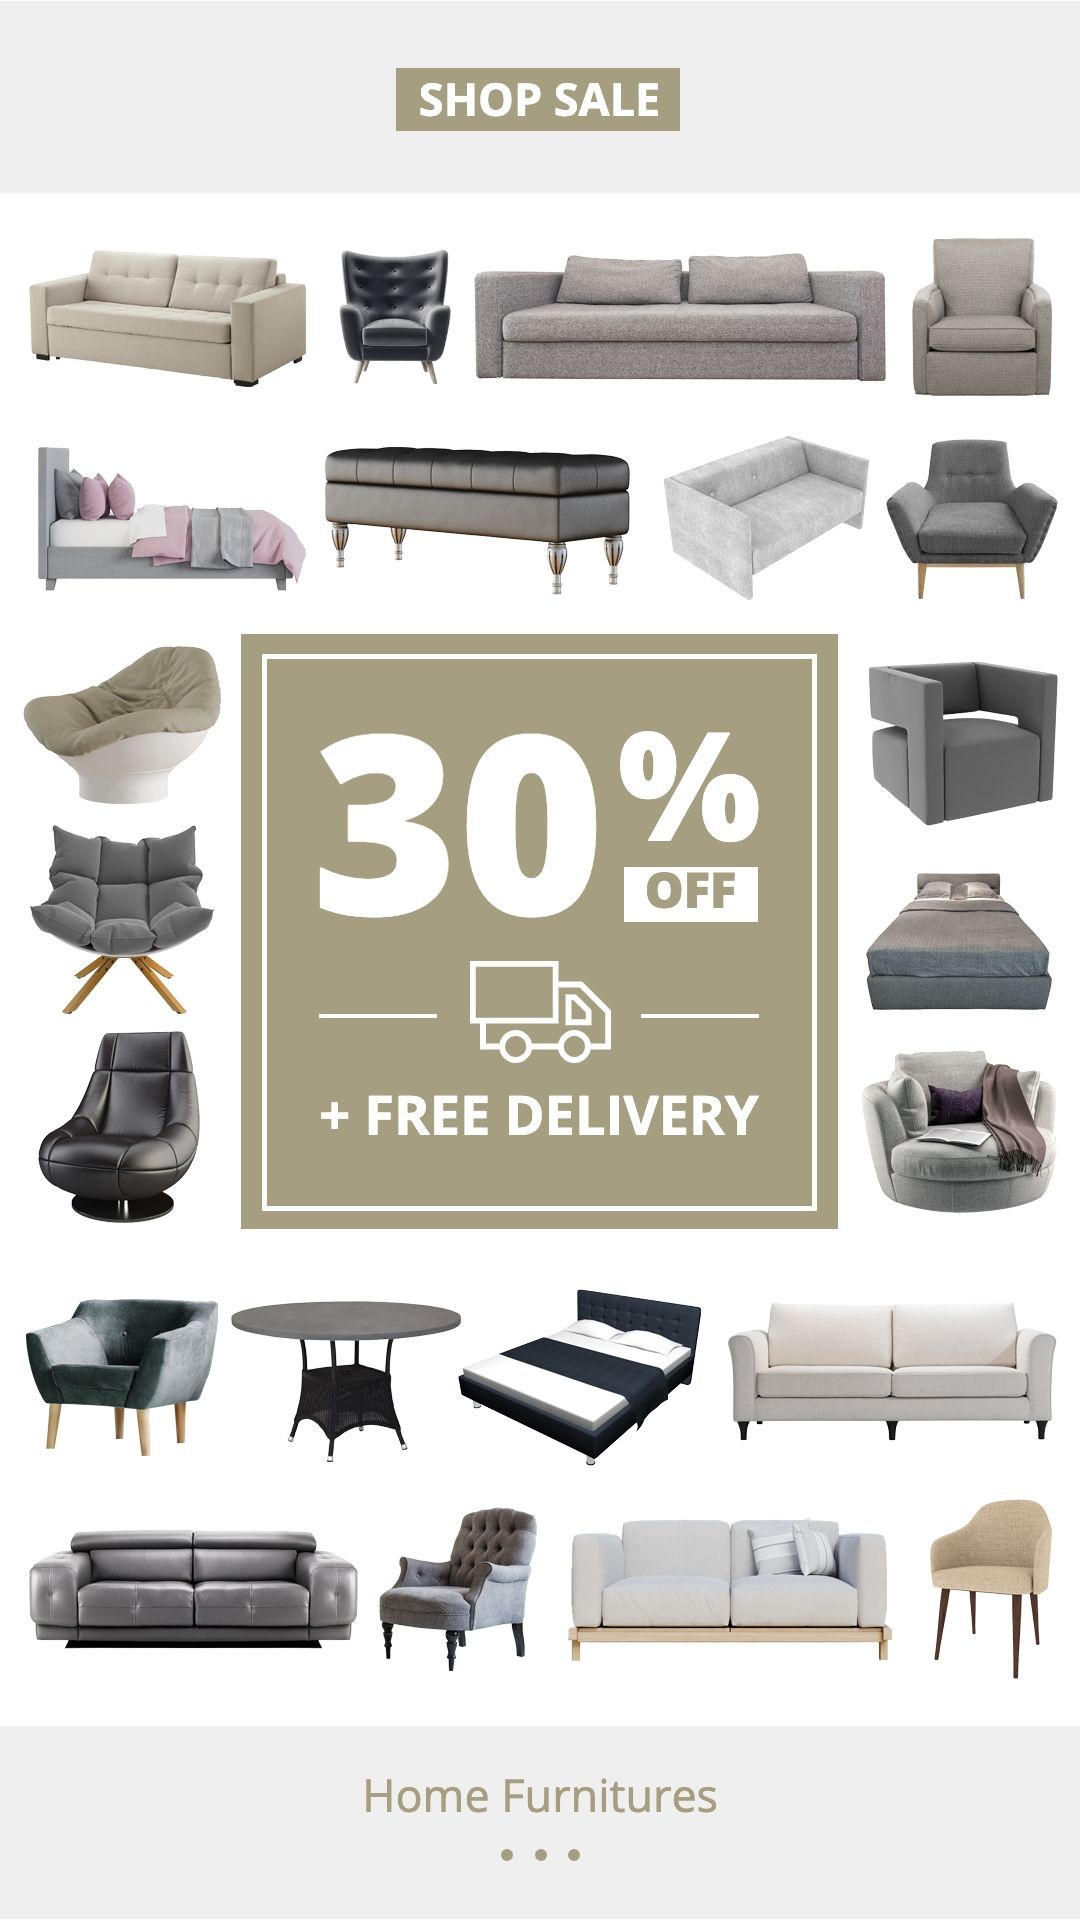 Free Delivery Day Home Furniture Sale Promotion Ecommerce Story